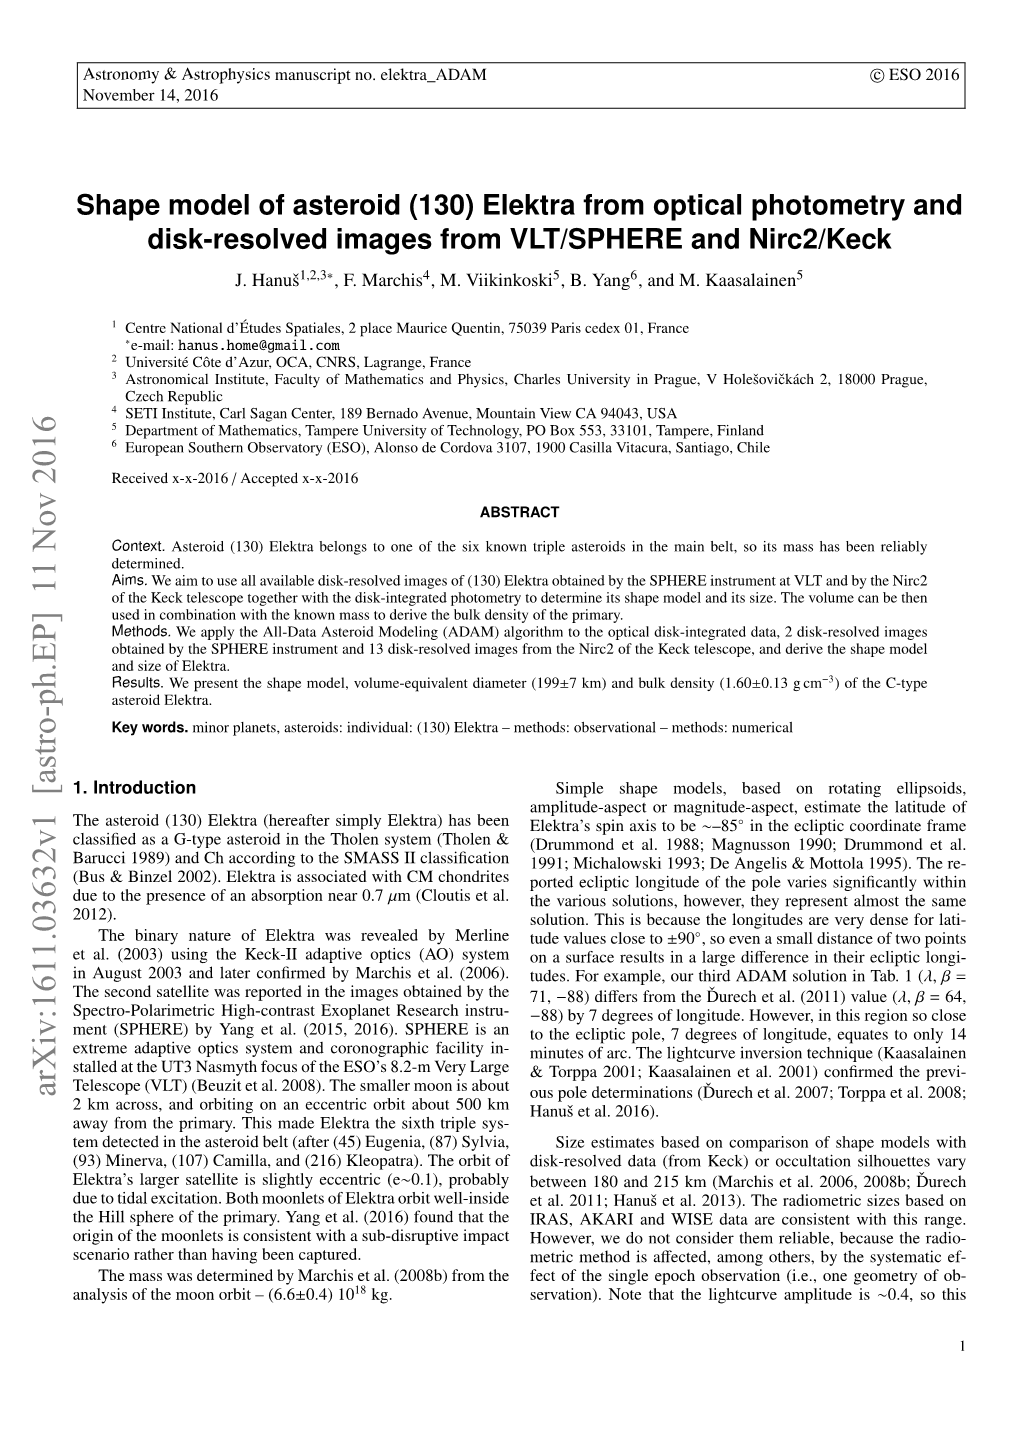 Shape Model of Asteroid (130) Elektra from Optical Photometry and Disk-Resolved Images from VLT/SPHERE and Nirc2/Keck J